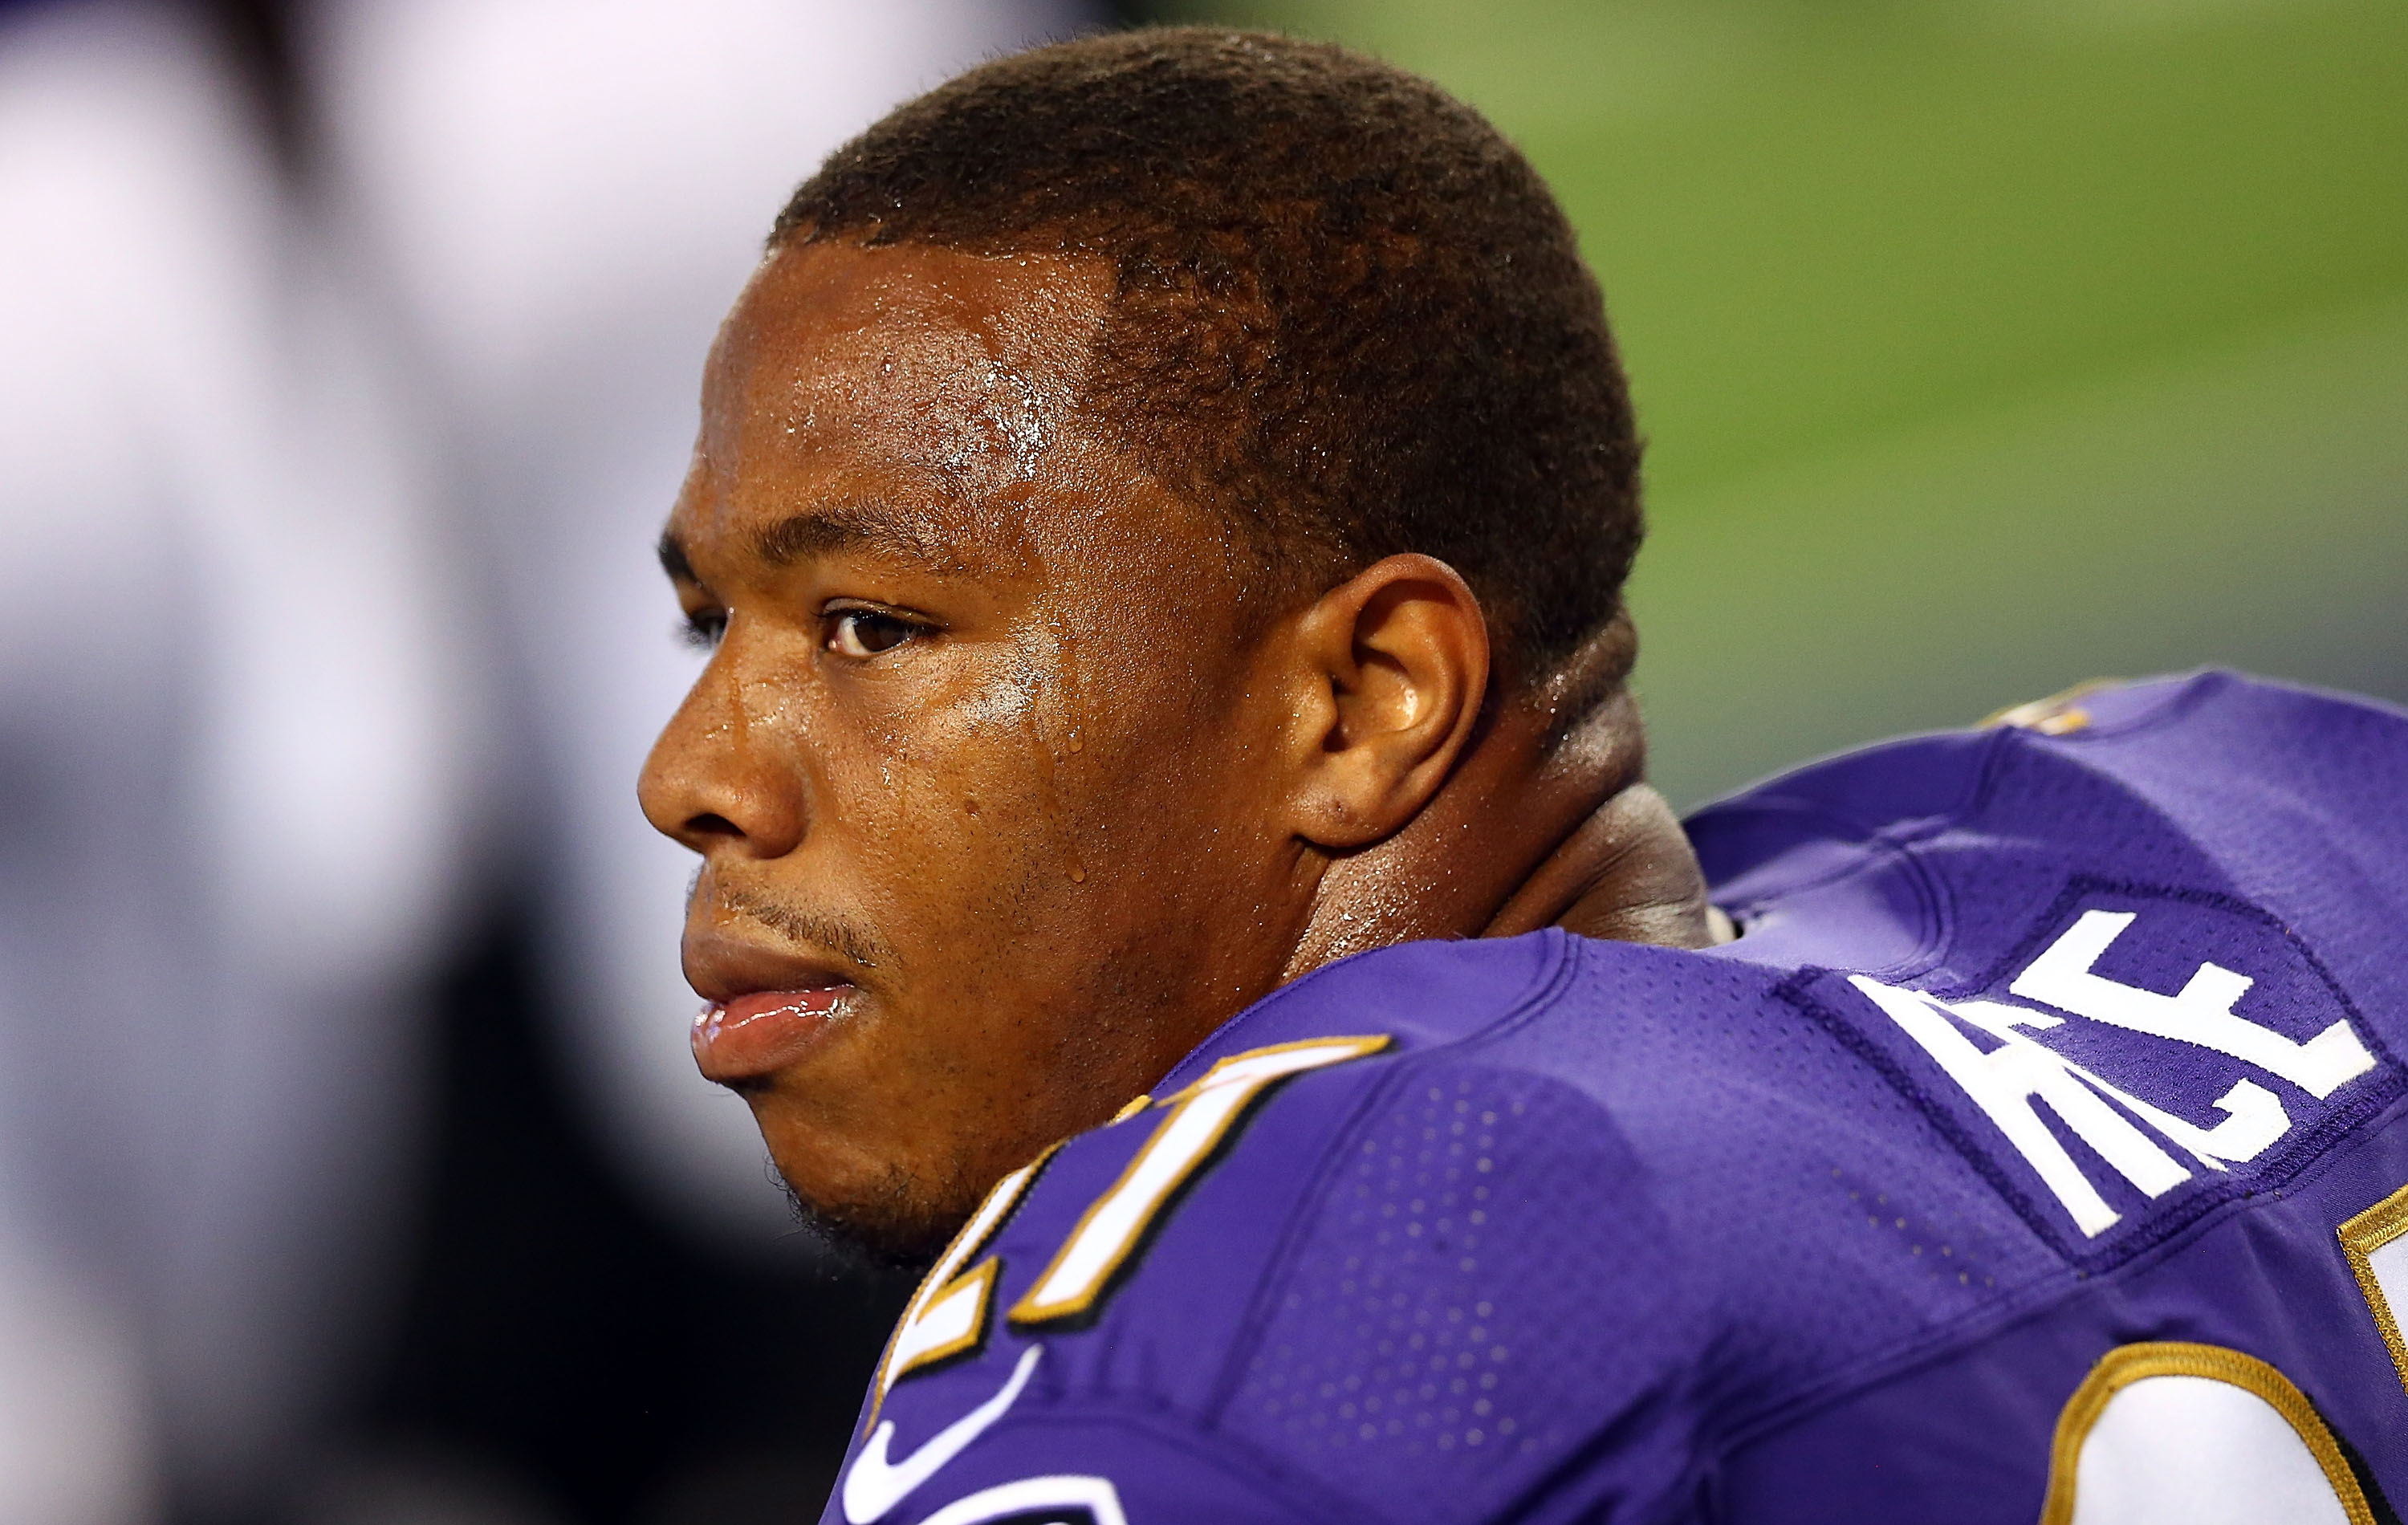 Ray Rice of the Baltimore Ravens sits on the bench against the Dallas Cowboys in the first half of their preseason game at AT&amp;T Stadium on August 16, 2014 in Arlington, Texas. (Ronald Martinez&mdash;Getty Images)